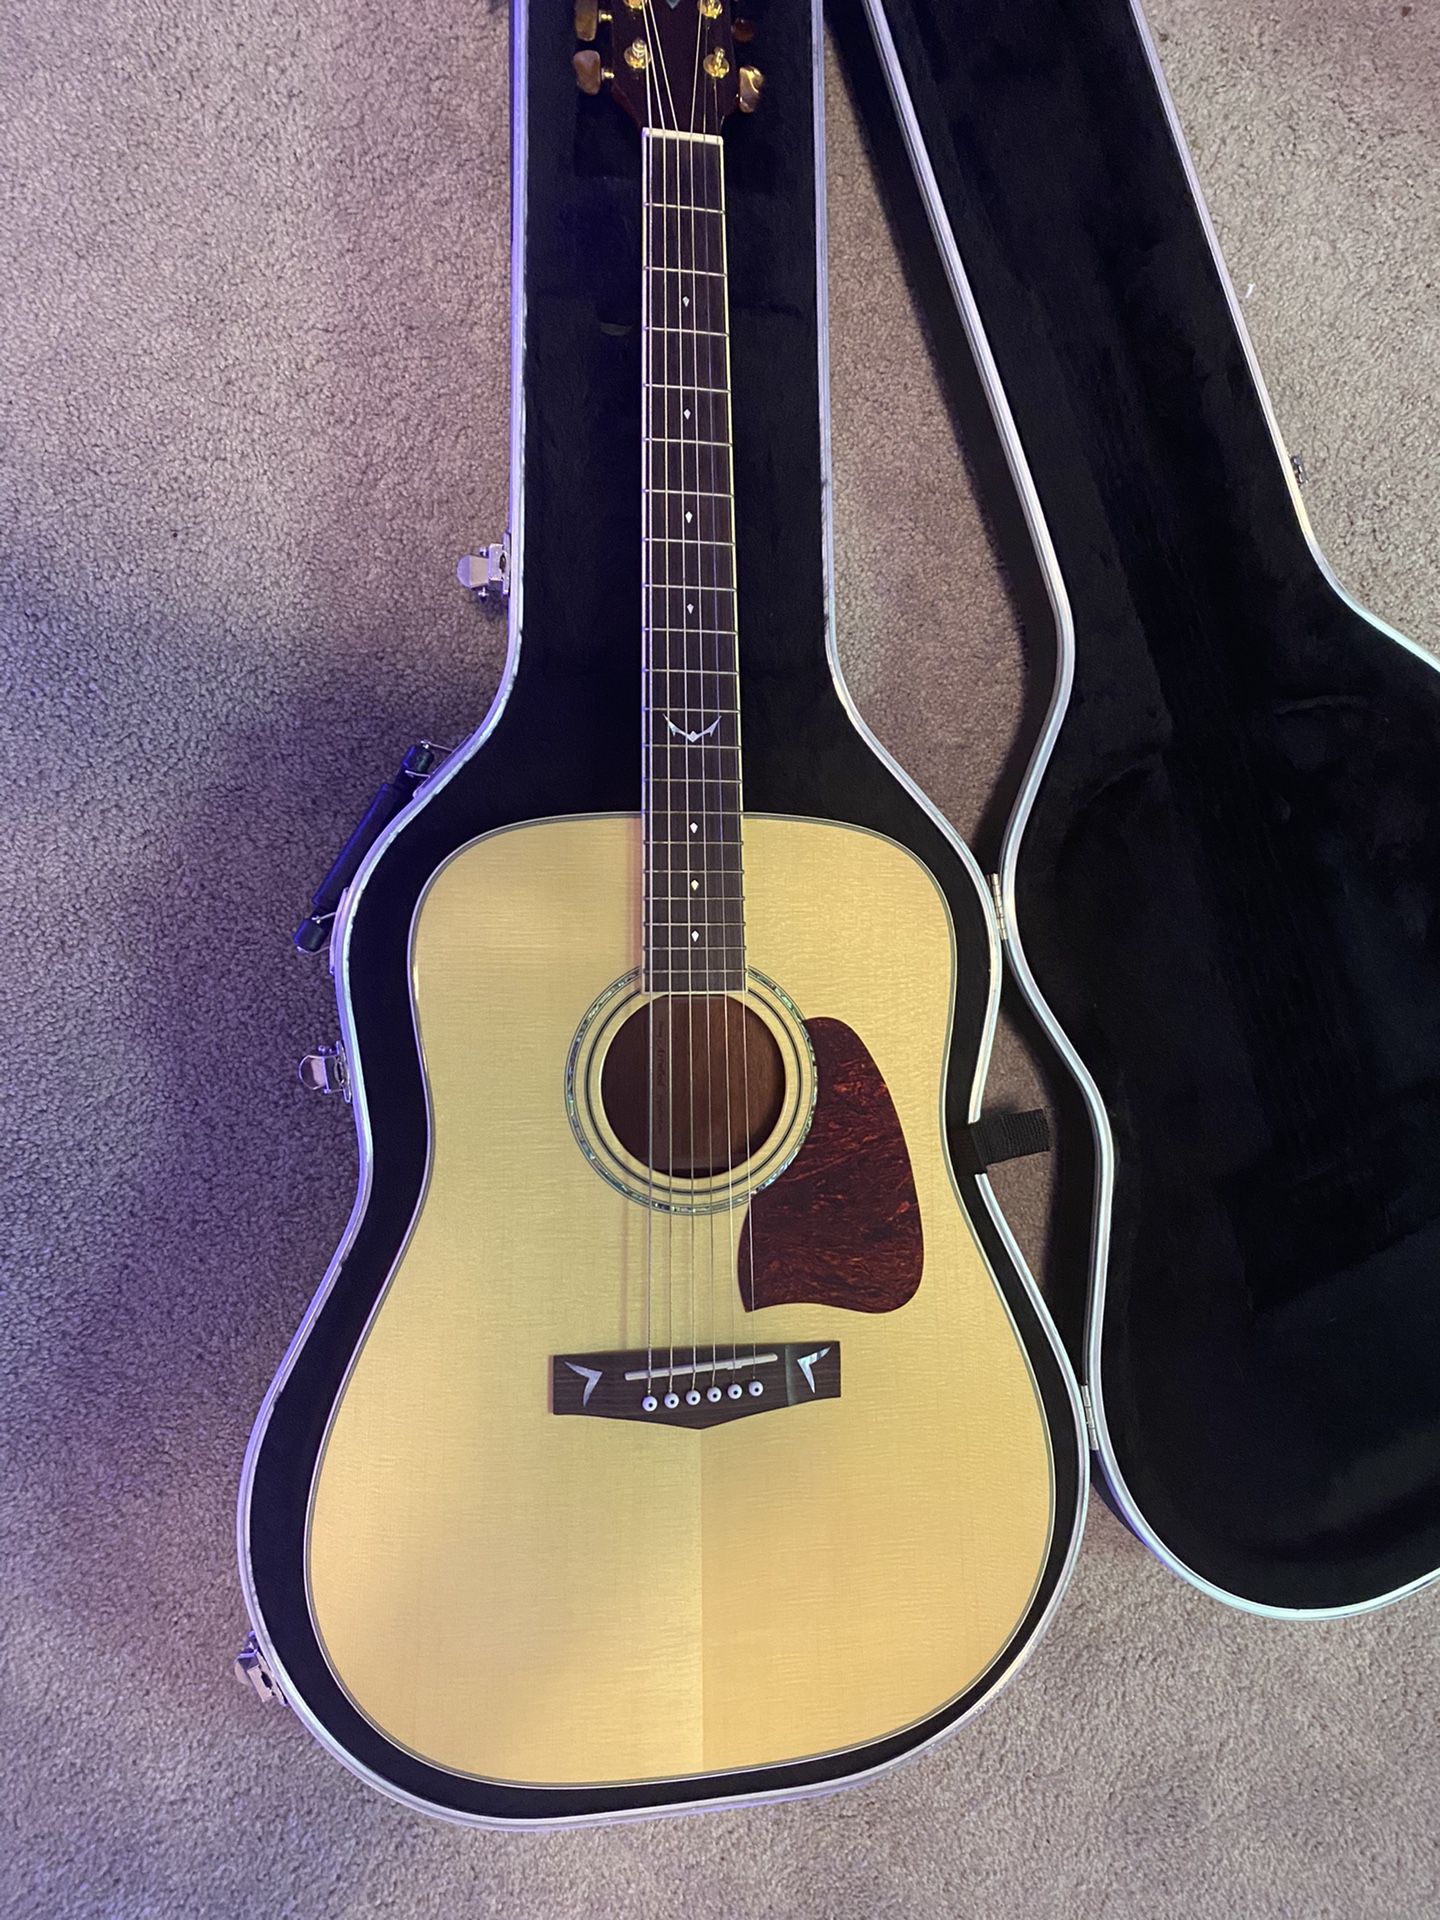 Ibanez AW-300-NT-1M-03 Acoustic Guitar